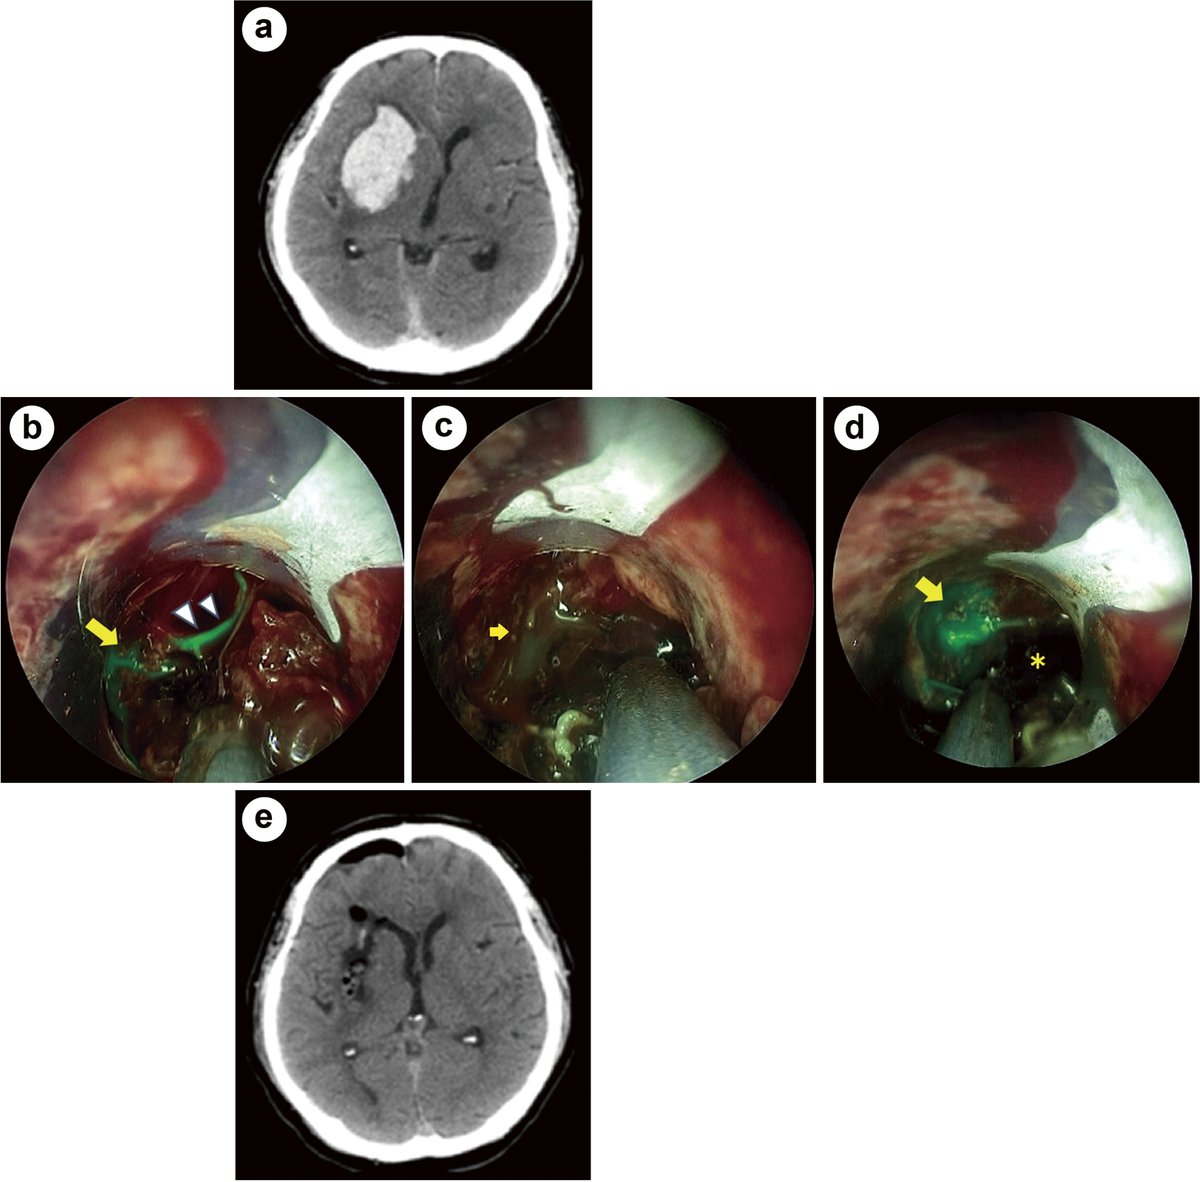 New Arrival: Usefulness of 4K-resolution Indocyanine Green Endoscope for the Removal of Spontaneous Intracerebral Hematomas
doi.org/10.2176/jns-nm…
#Neuroendoscopy(v) #Endoscopy #FluorescenceAngiography #HematomaRemoval #IndocyanineGreen #IntracerebralHemorrhage